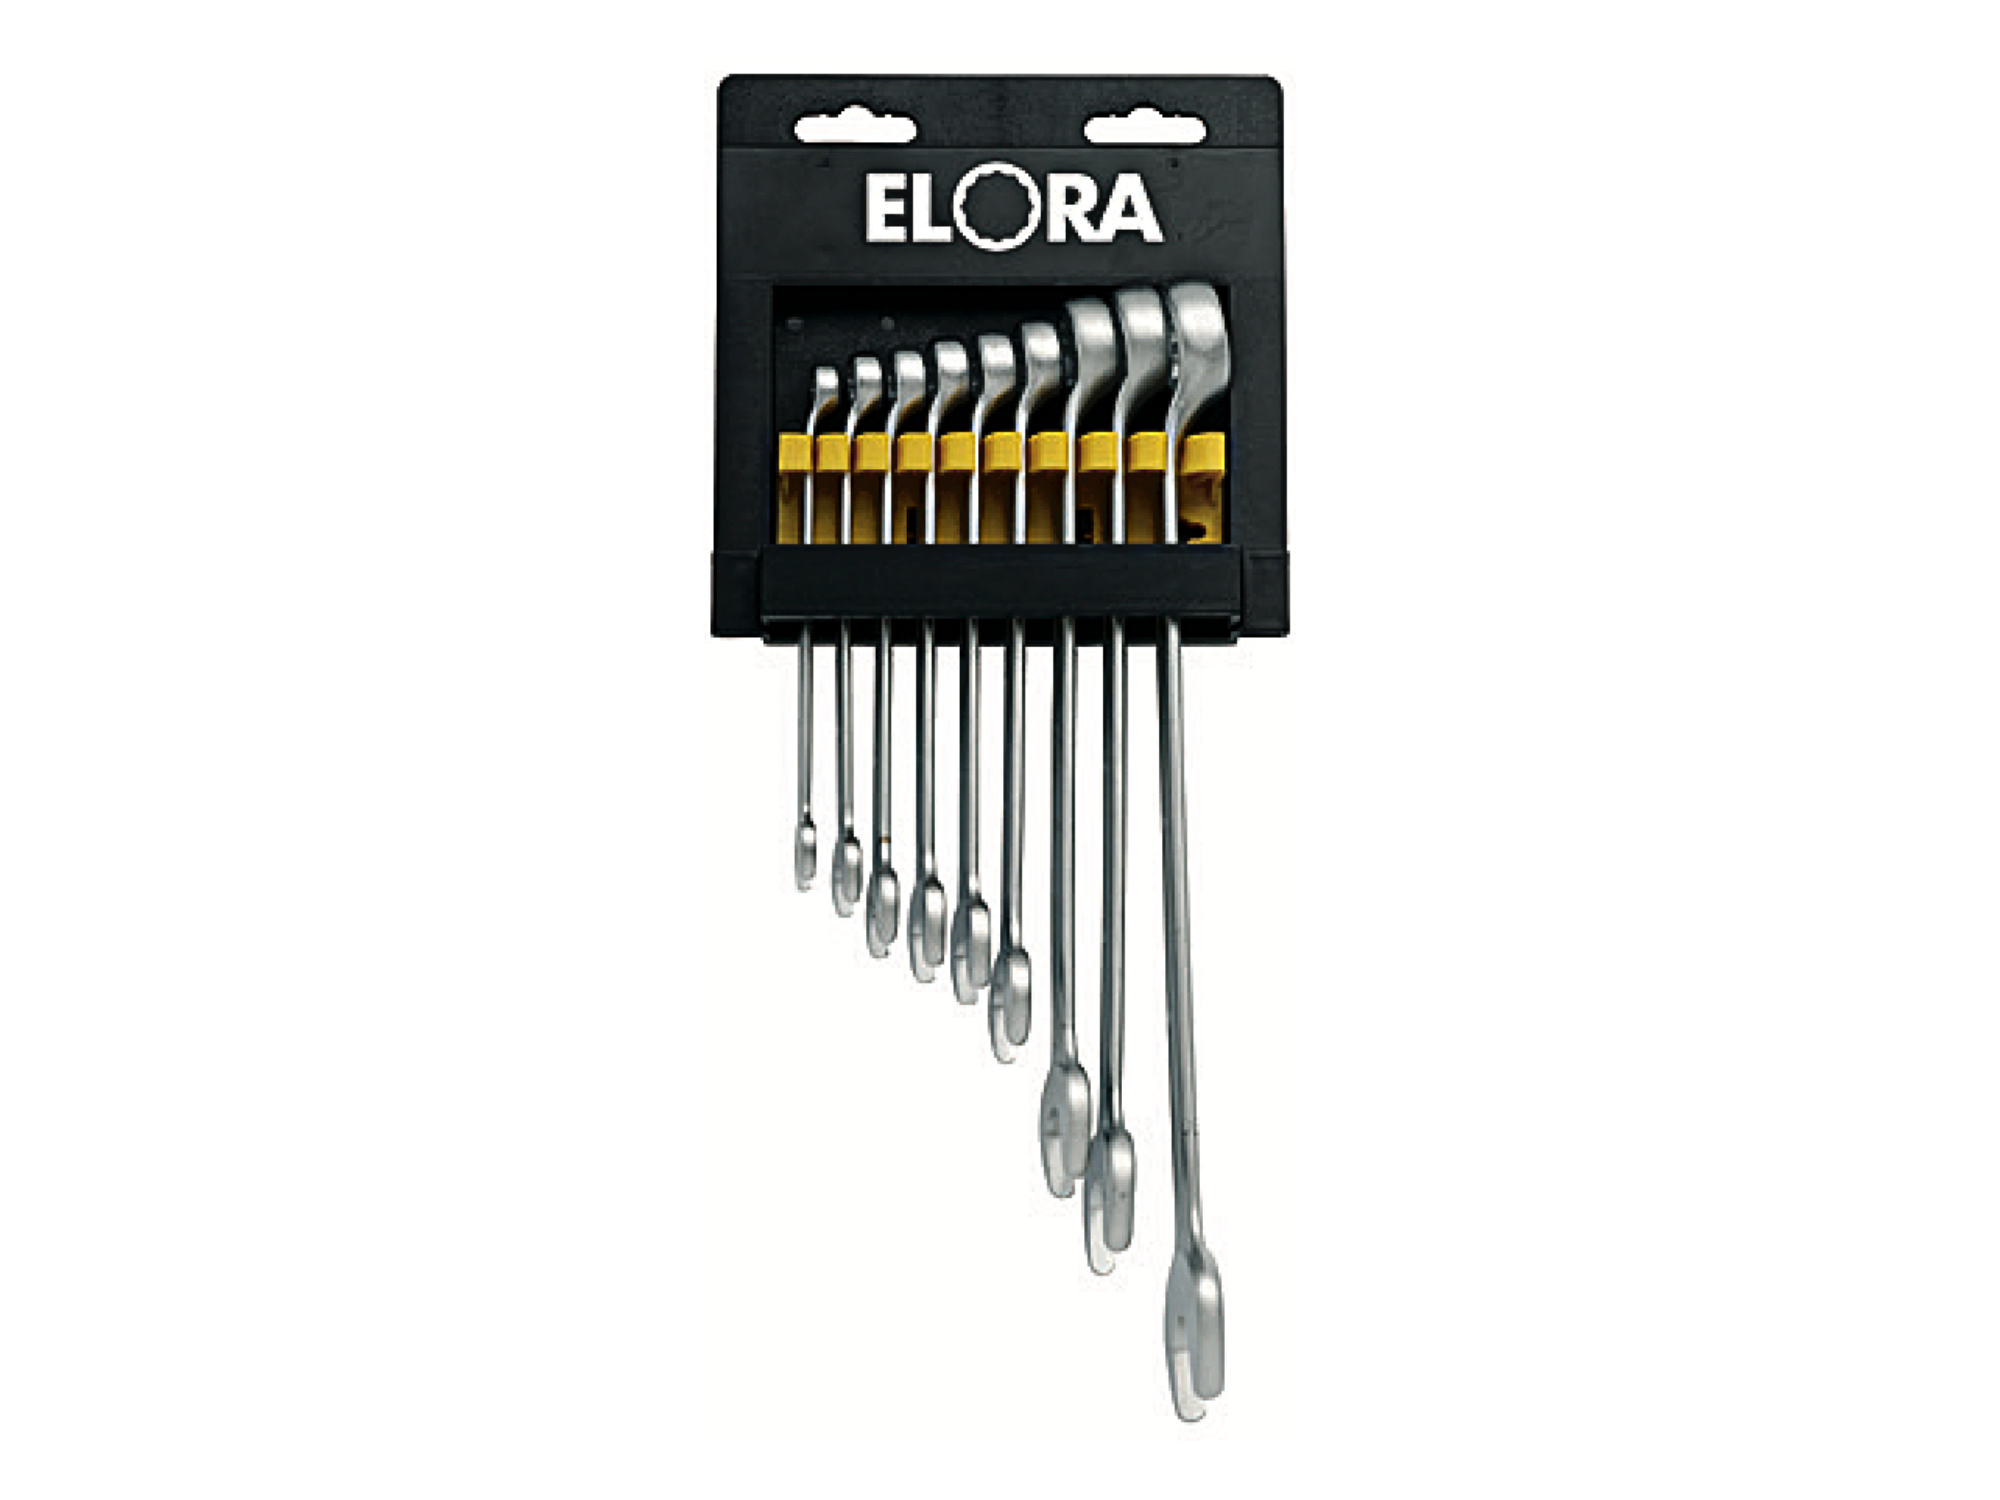 ELORA 205-KH9 Combination Spanners Set Tools (ELORA Tools) - Premium Combination Spanners Set from ELORA - Shop now at Yew Aik.